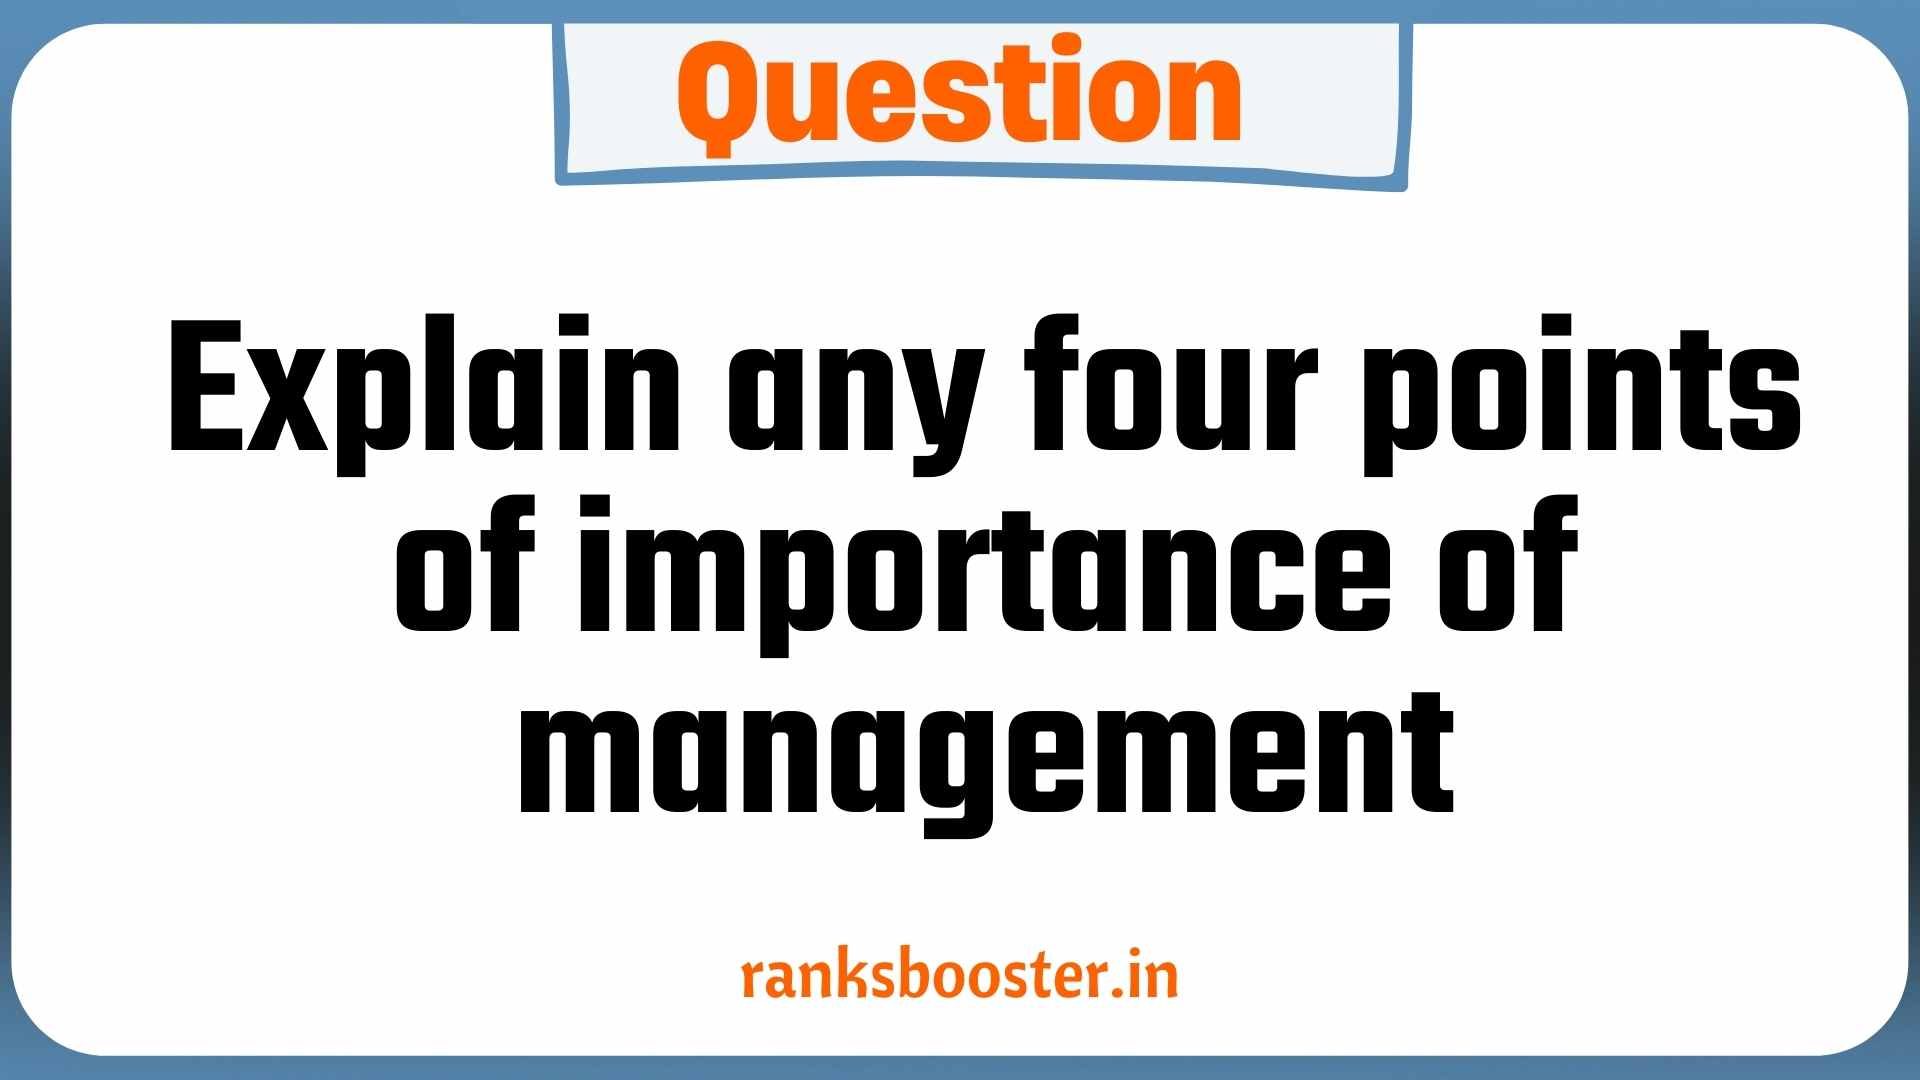 Question: Explain any four points of importance of management. [CBSE 2016]